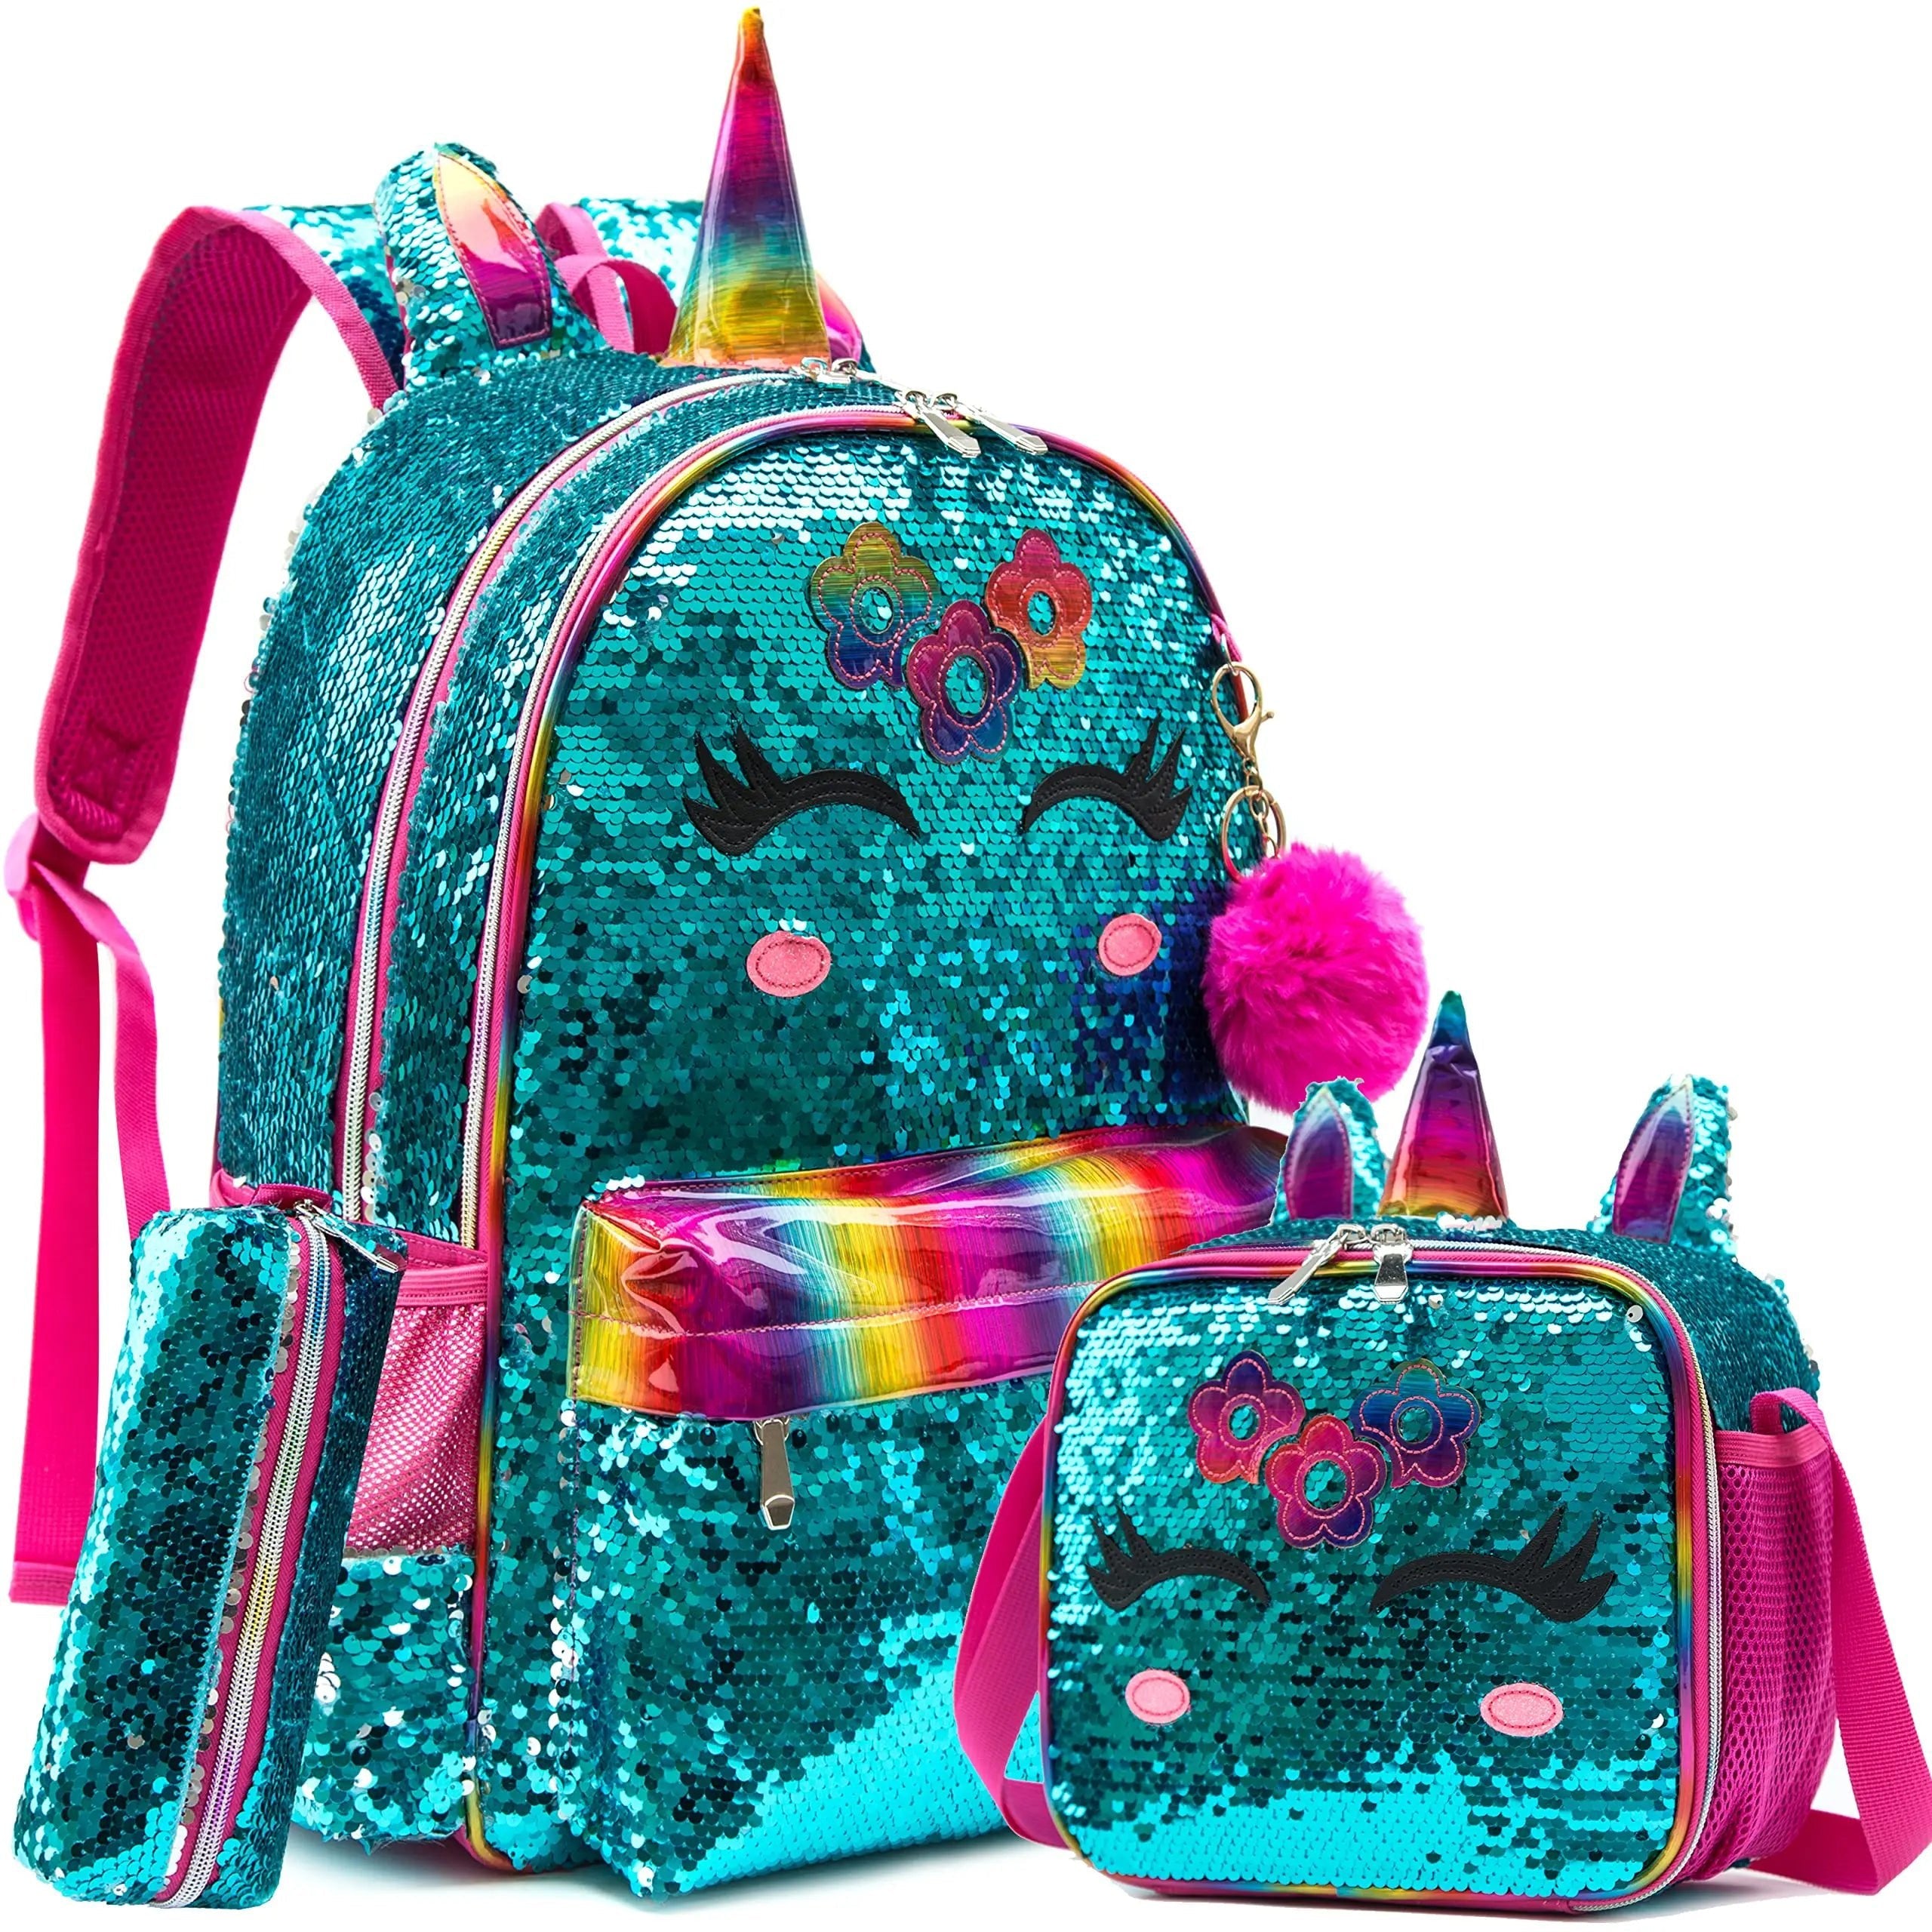 Girls' 16" School Backpack Set - 3pcs with Lunch Box, Ideal for Elementary Students, Travel Sequin Backpack 1047-3sanduomeihua